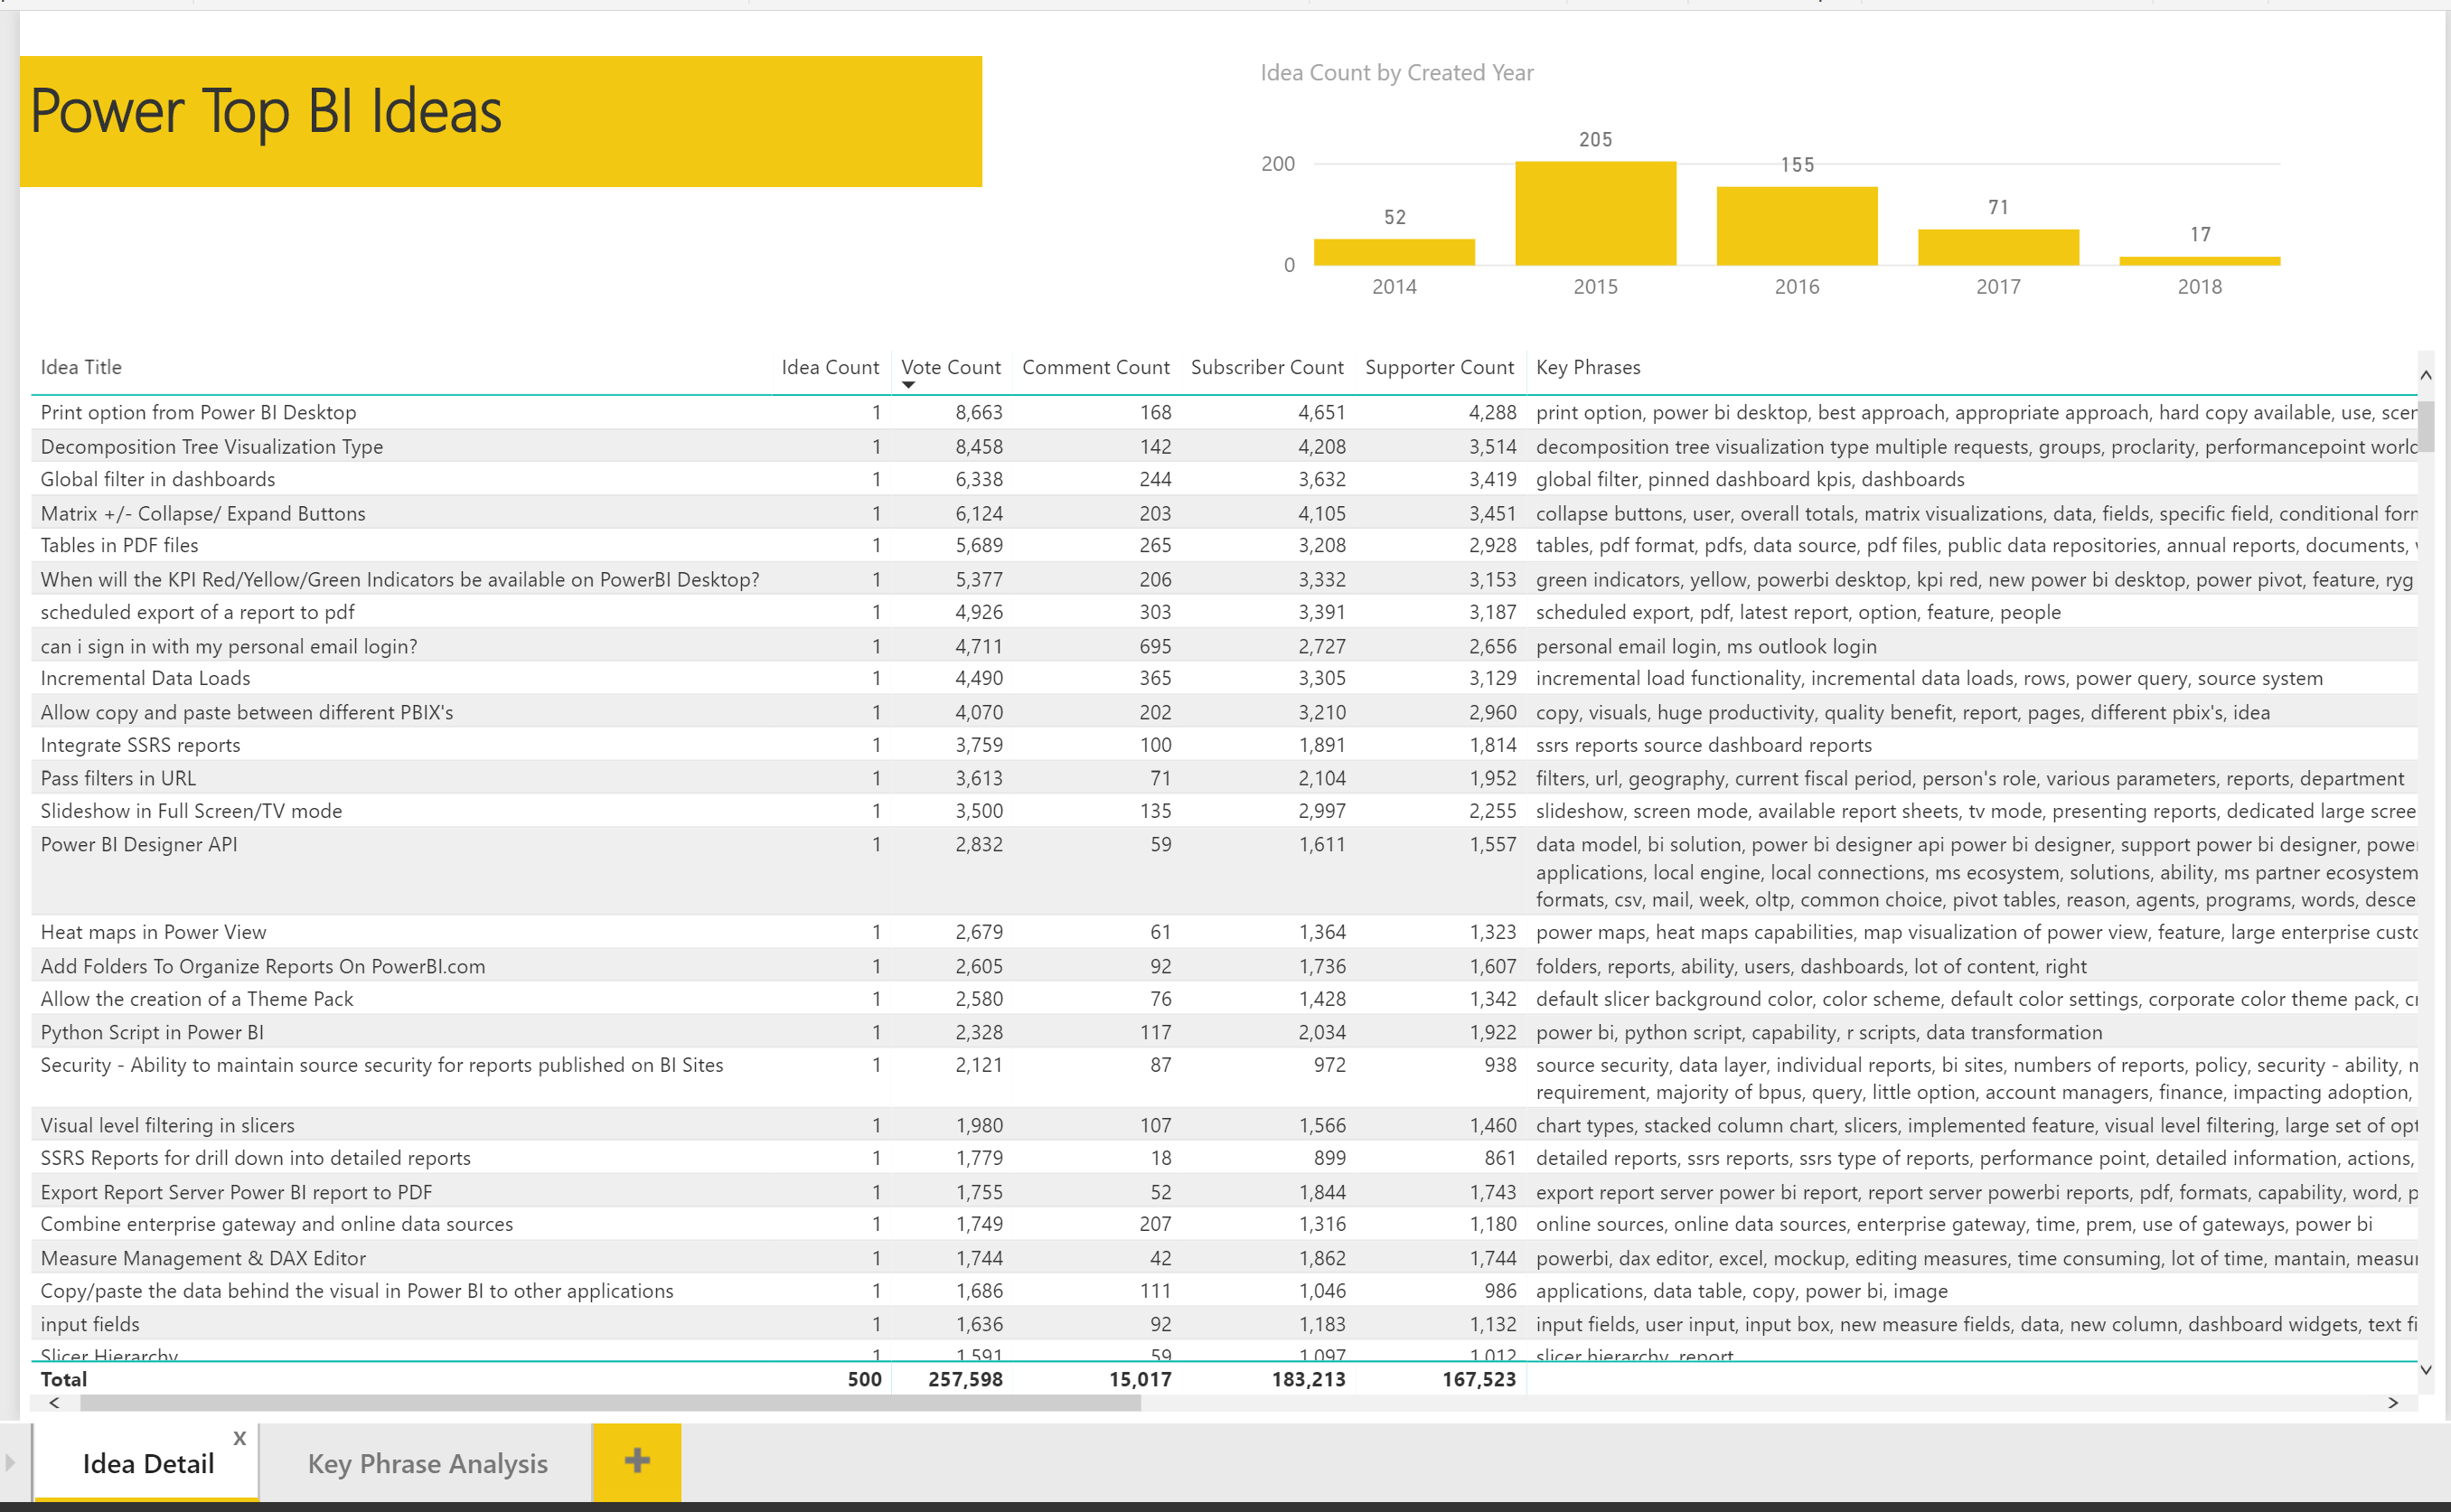 Top 500 Power BI Ideas Sorted by Vote Count